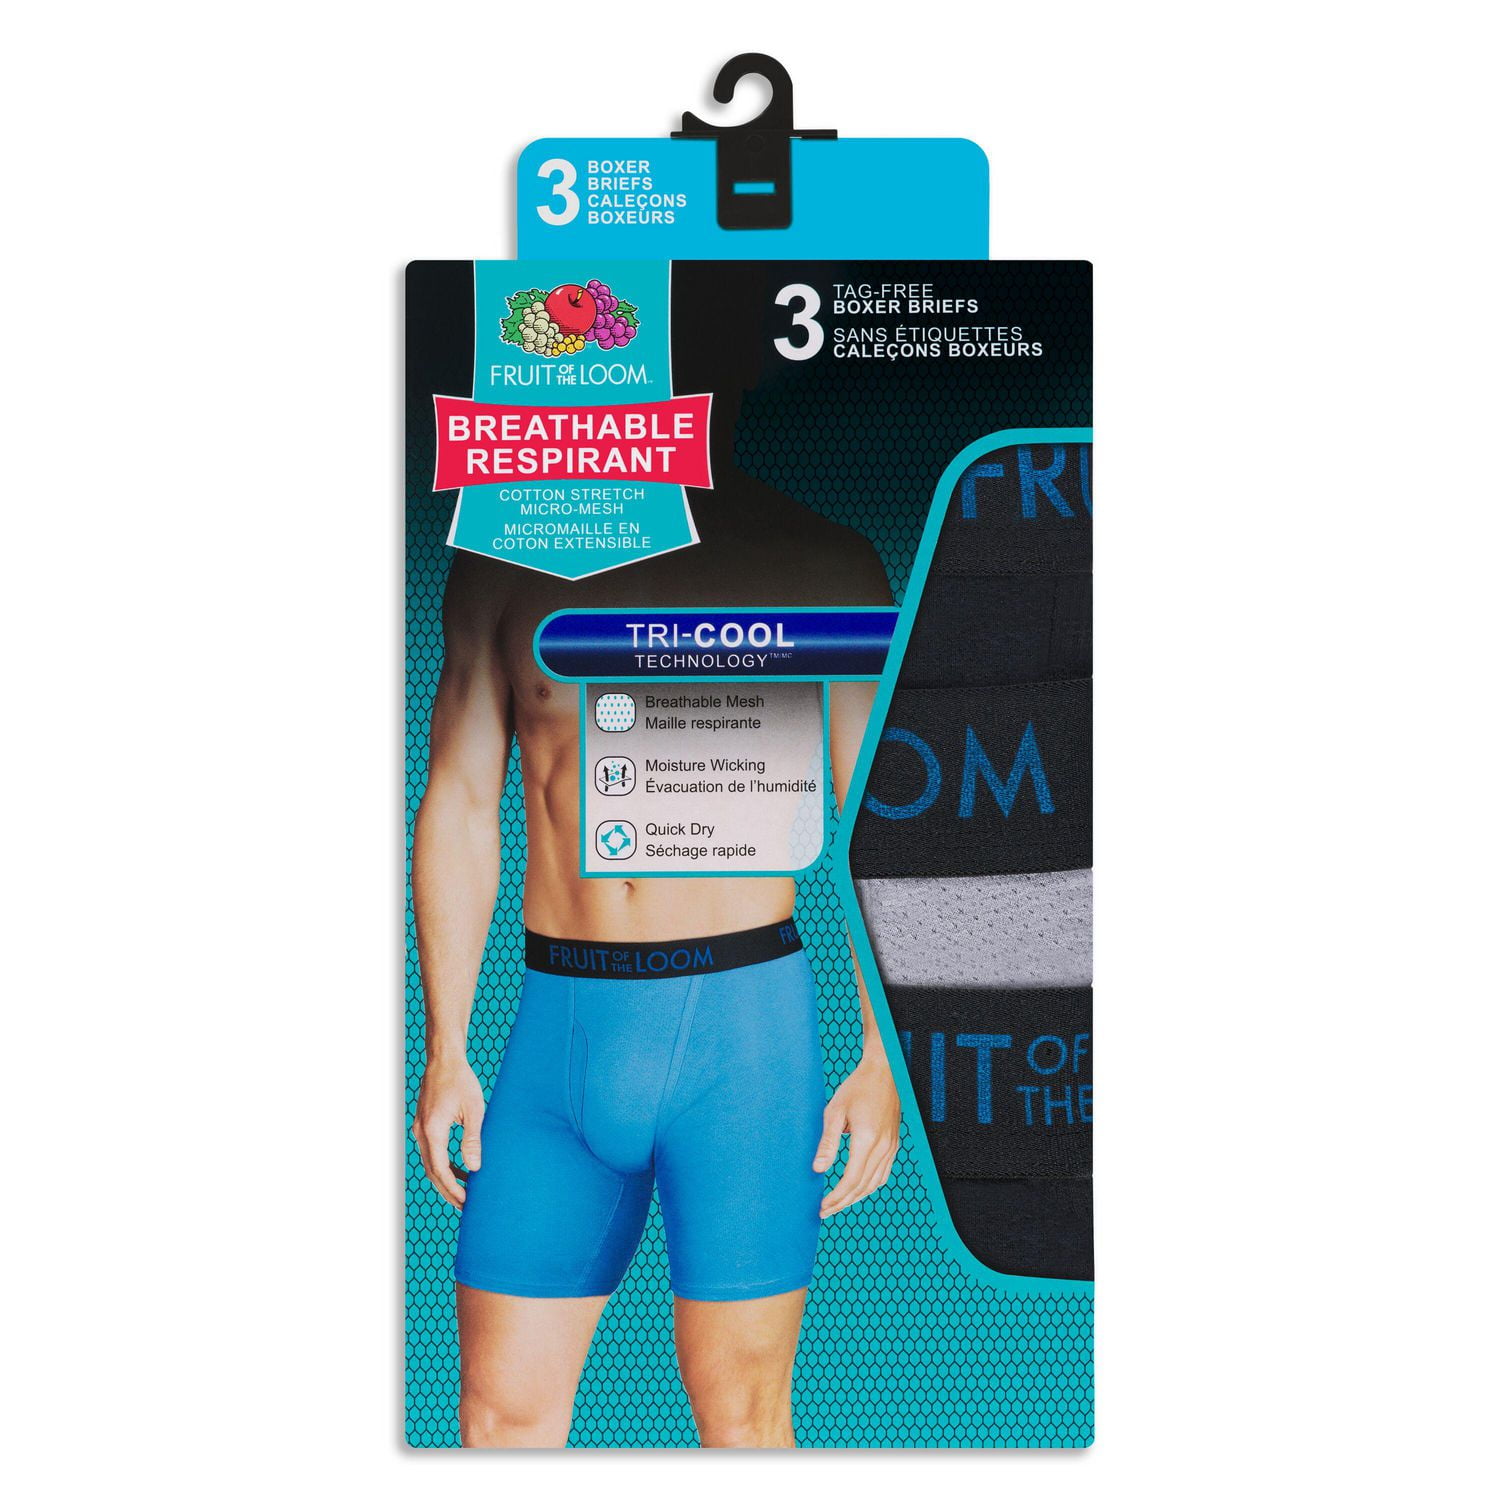 Fruit of the Loom Men's Breathable with Ultra Flex Boxer Briefs, 3-Pack,  Sizes S-XL